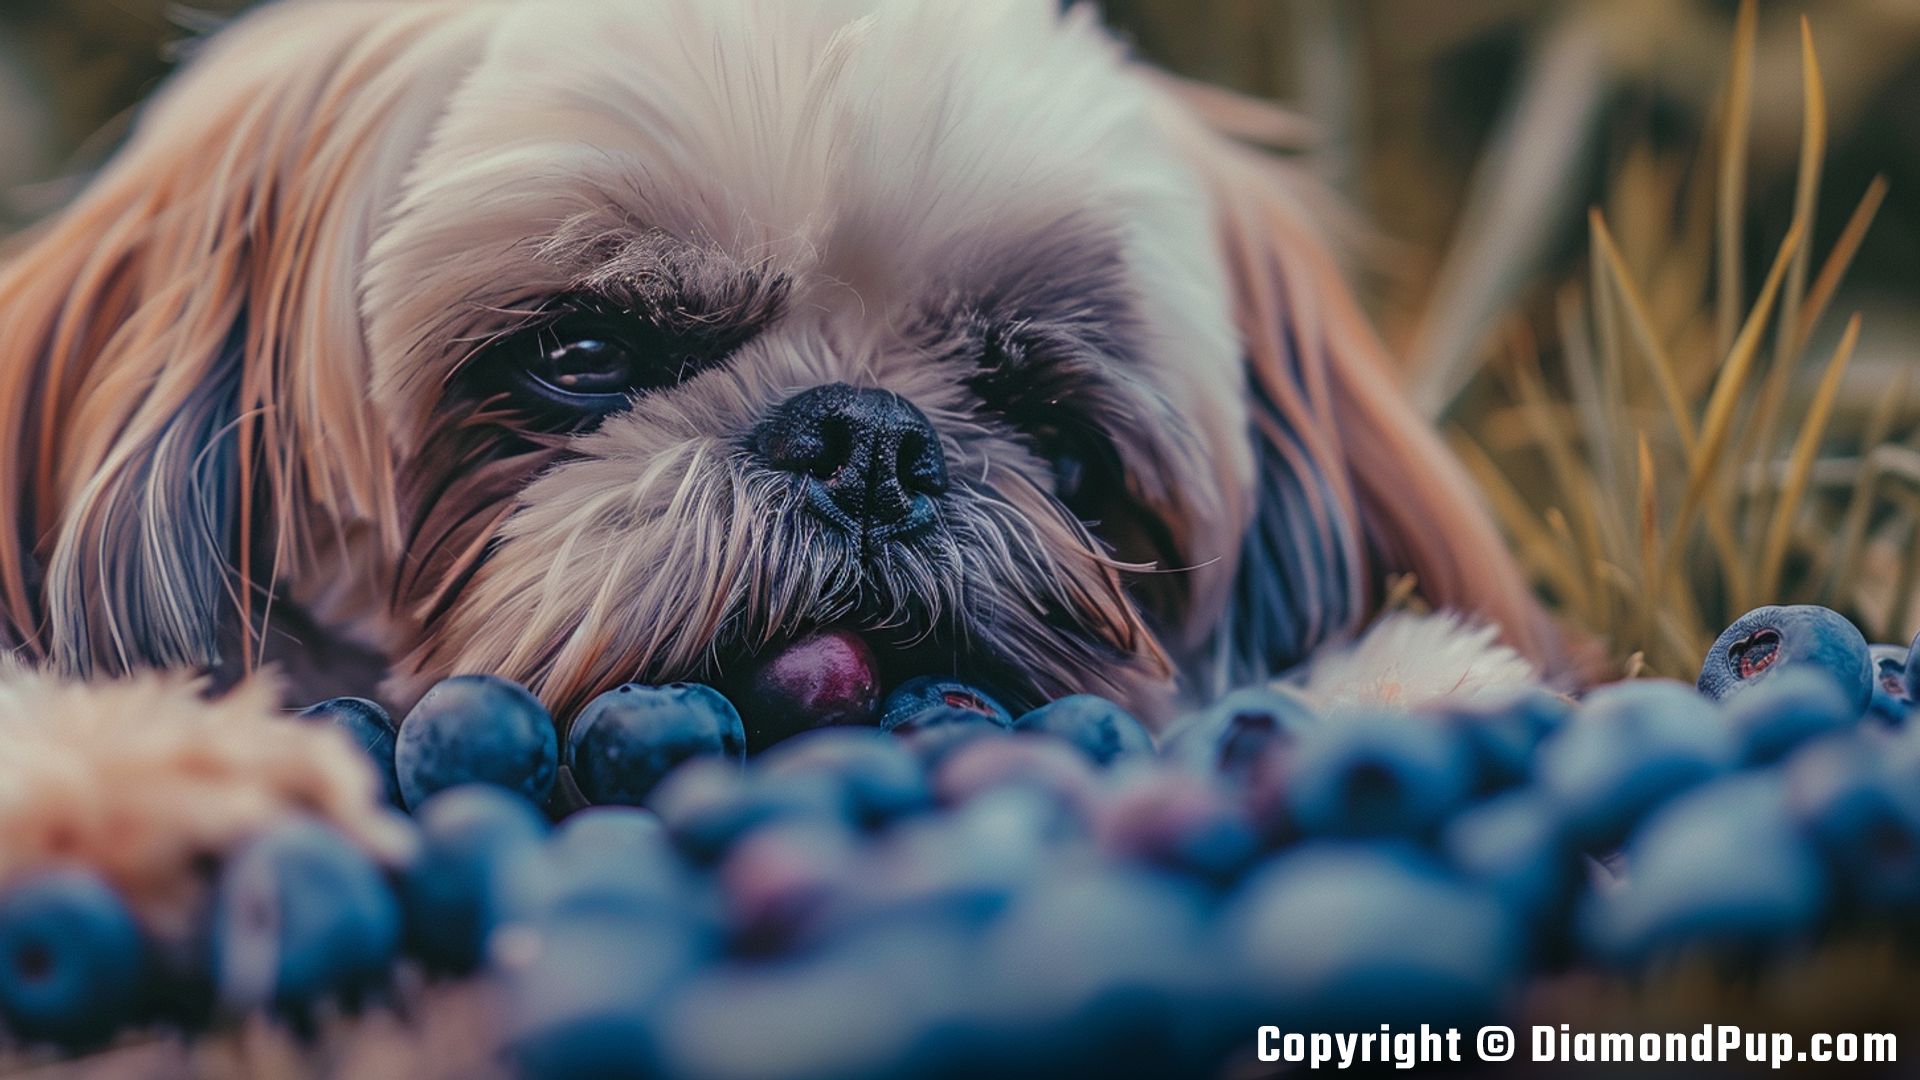 Photo of an Adorable Shih Tzu Snacking on Blueberries